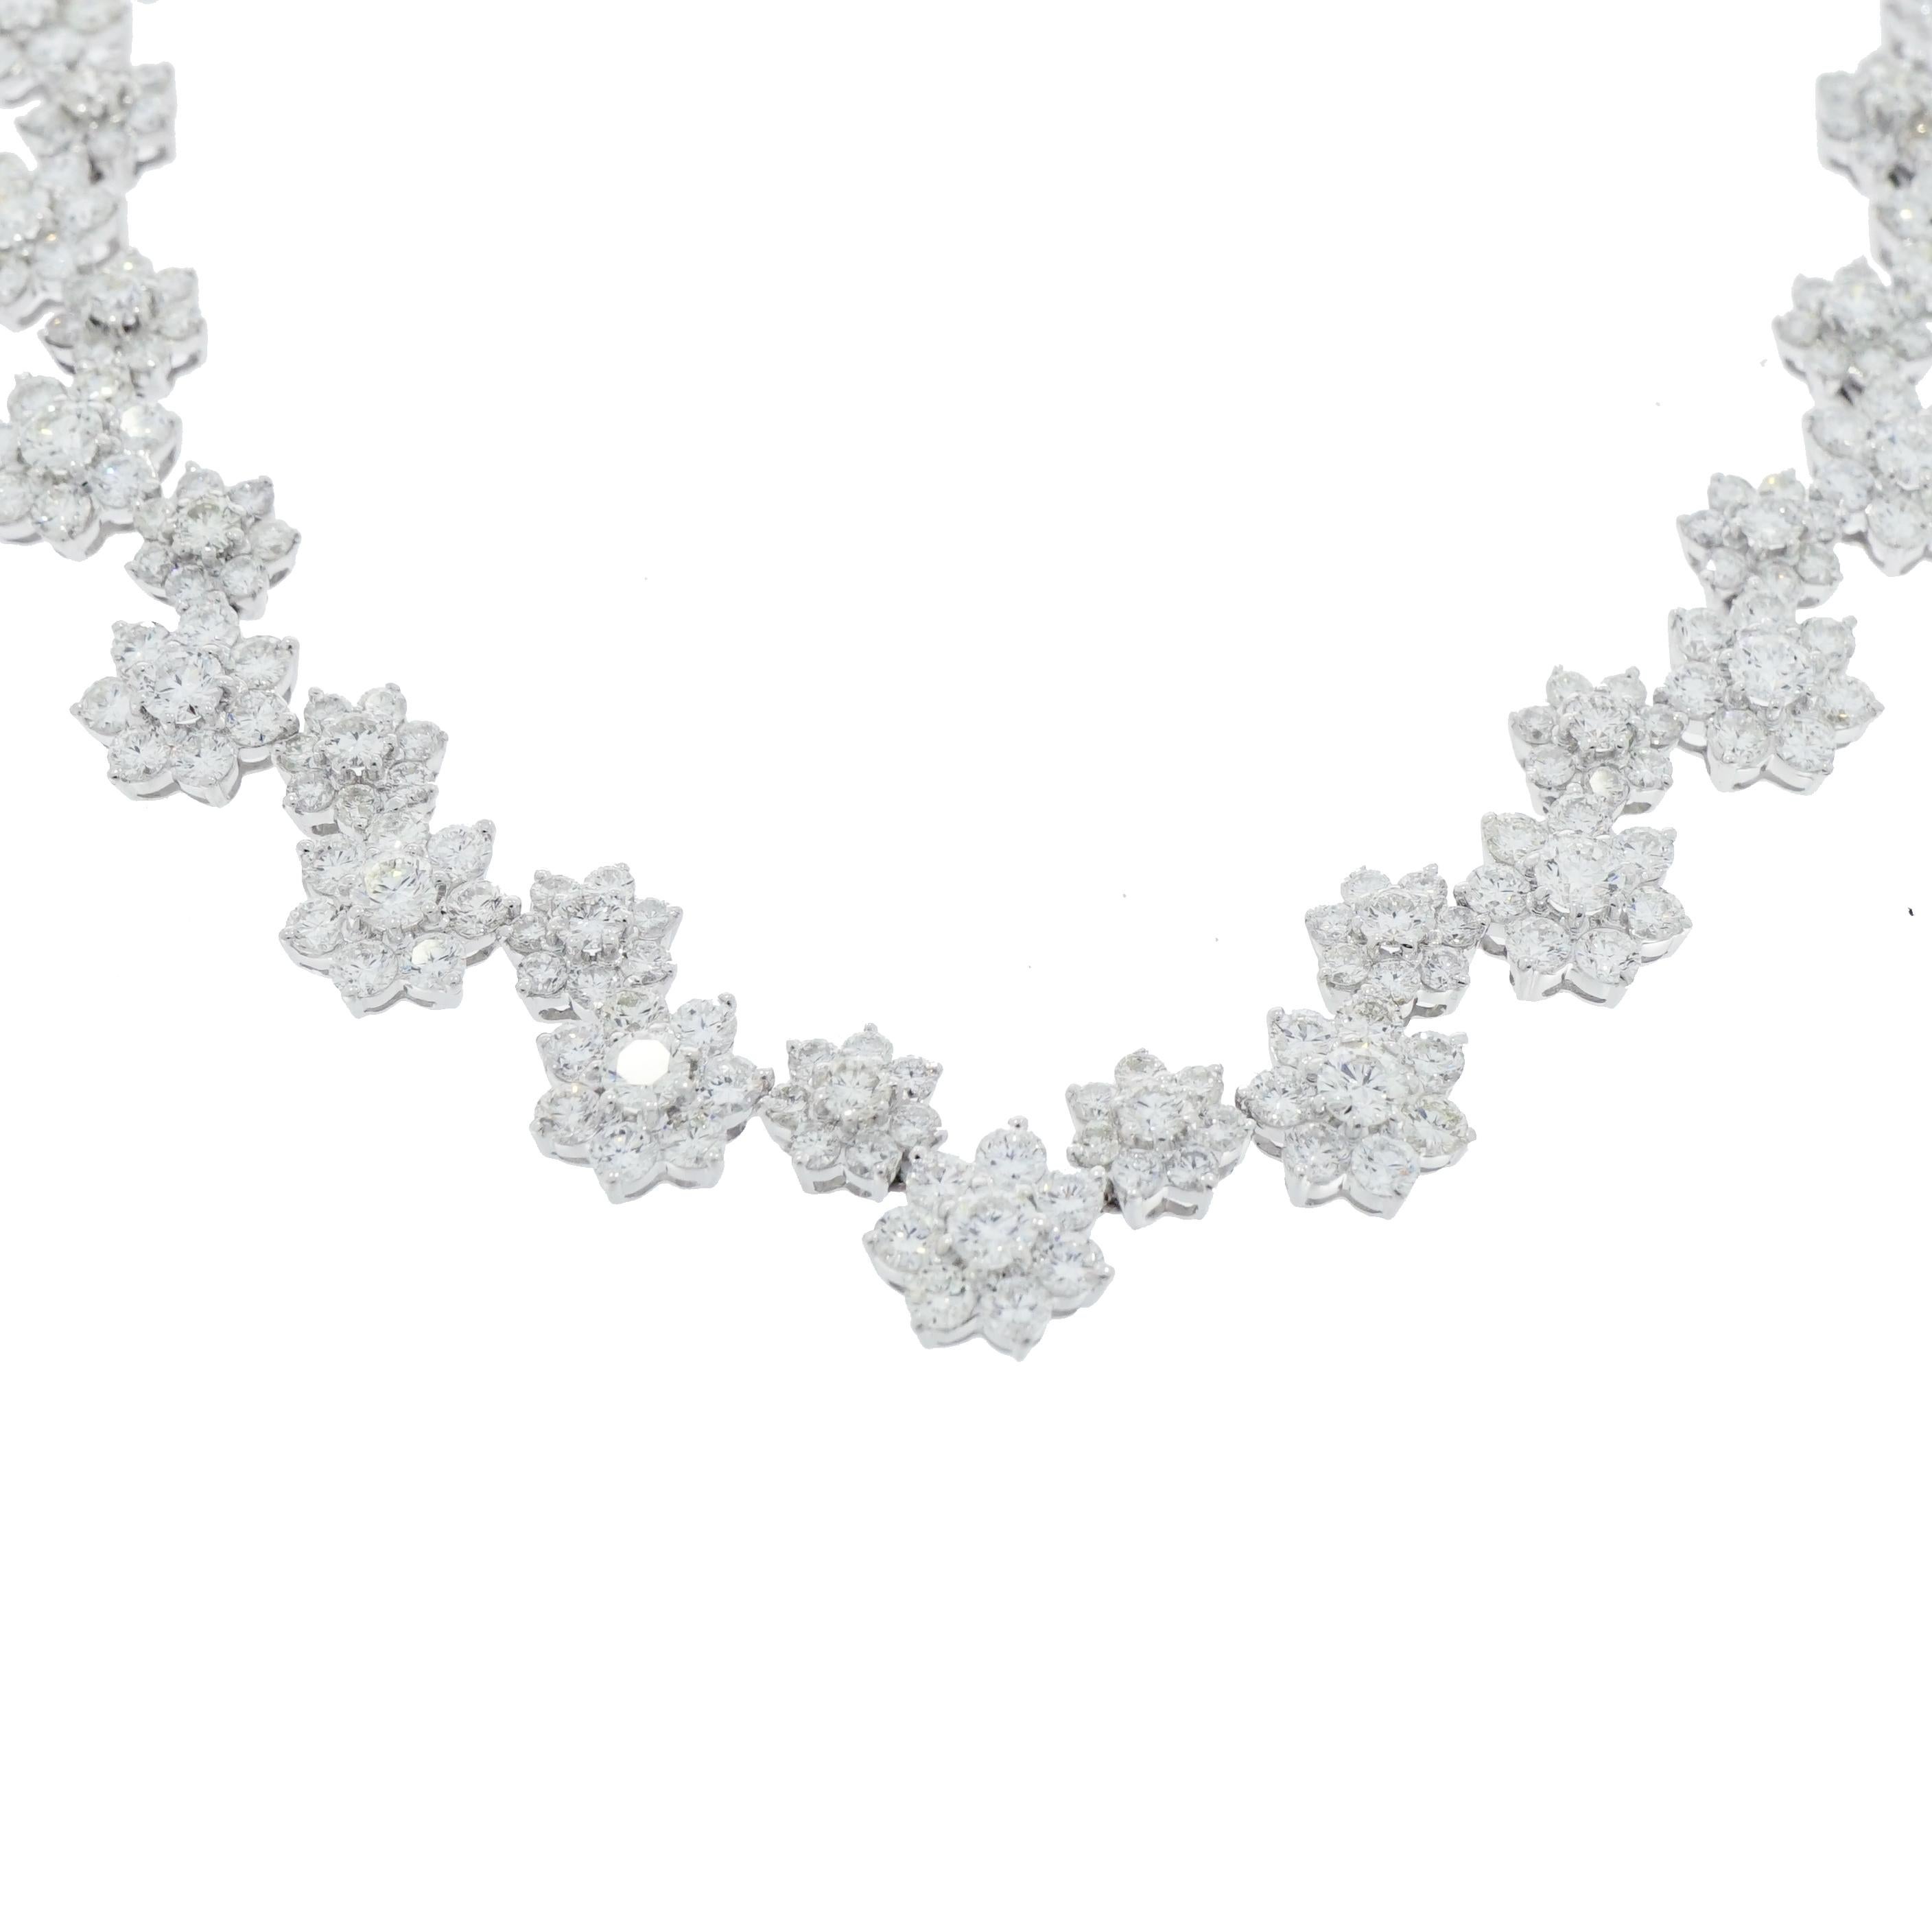 This is an exquisite Diamond Flower Necklace crafted in 18K White Gold with 400 round diamonds. G/H in color, SI1/SI2 clarity, weighing 46.20 carat total. 
A classic design of floral motive comprised of 15 larger flower clusters, each center